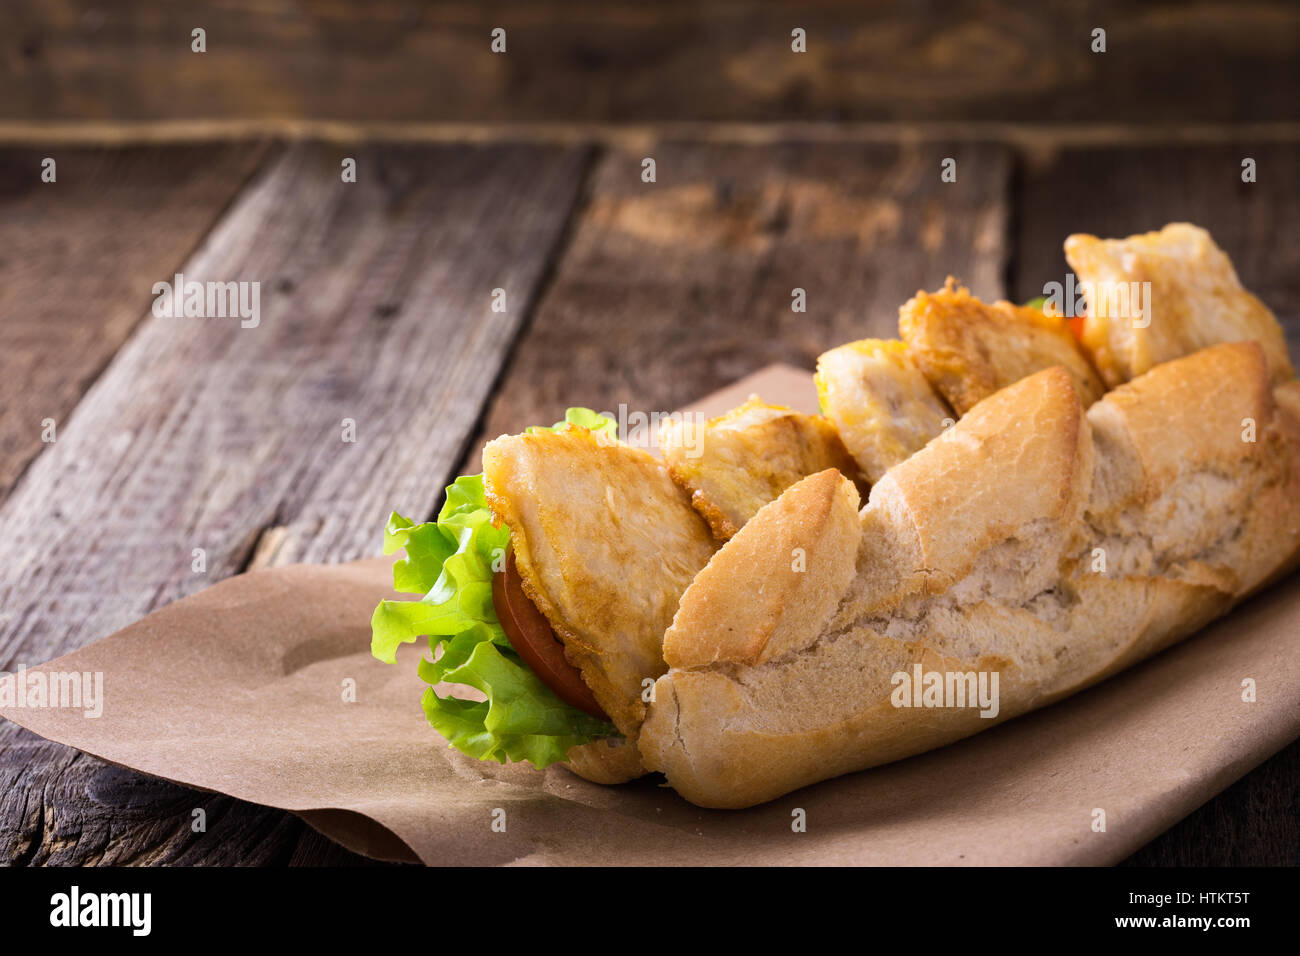 Homemade fried fish sandwich. Fried catfish po boy on rustic wooden table Stock Photo